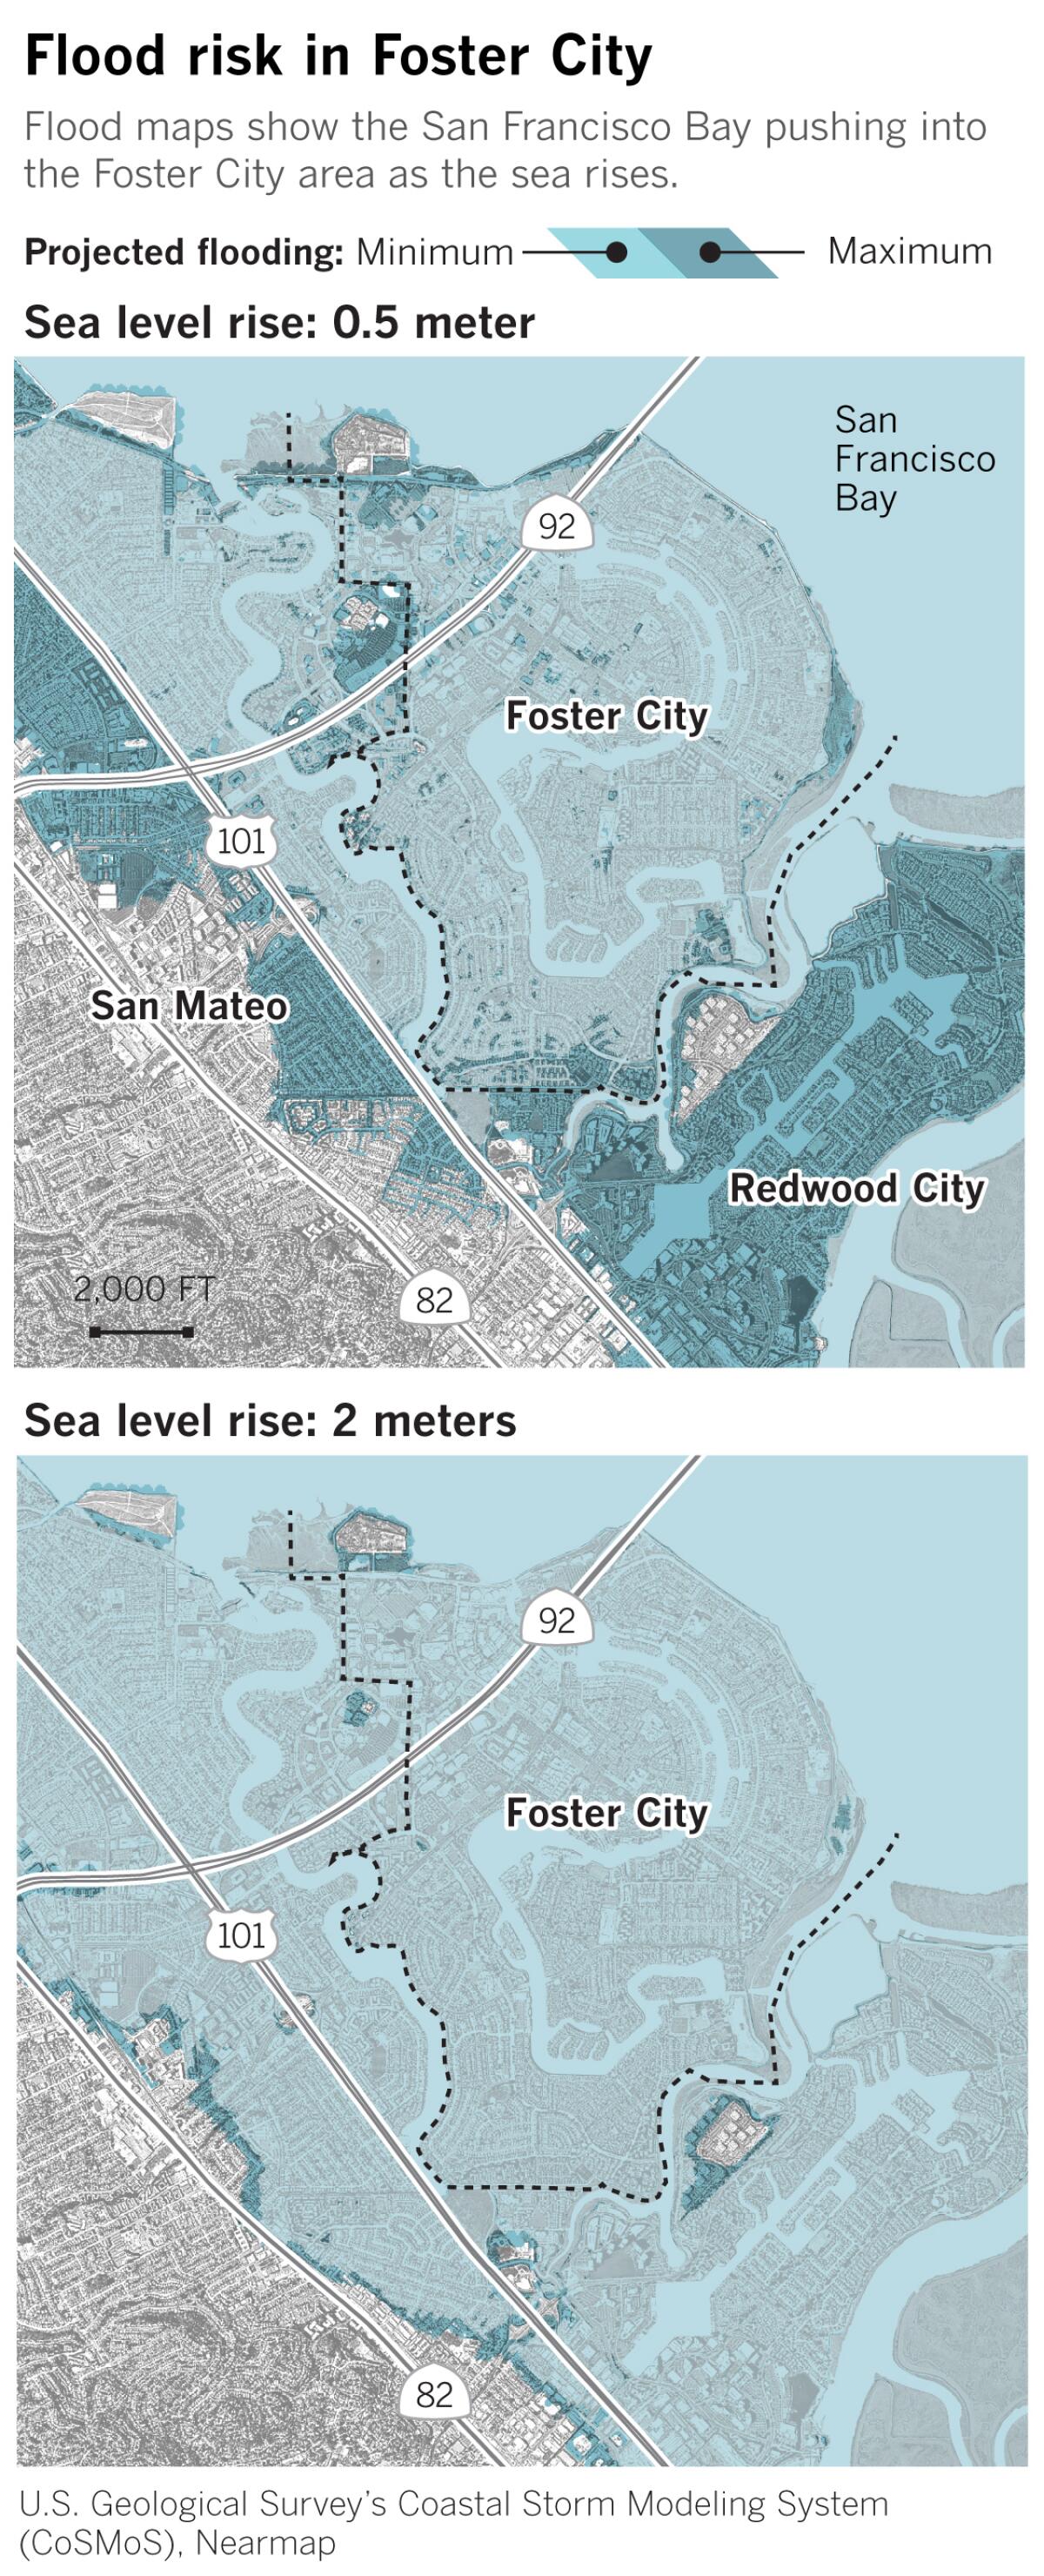 Flood risk in Foster City